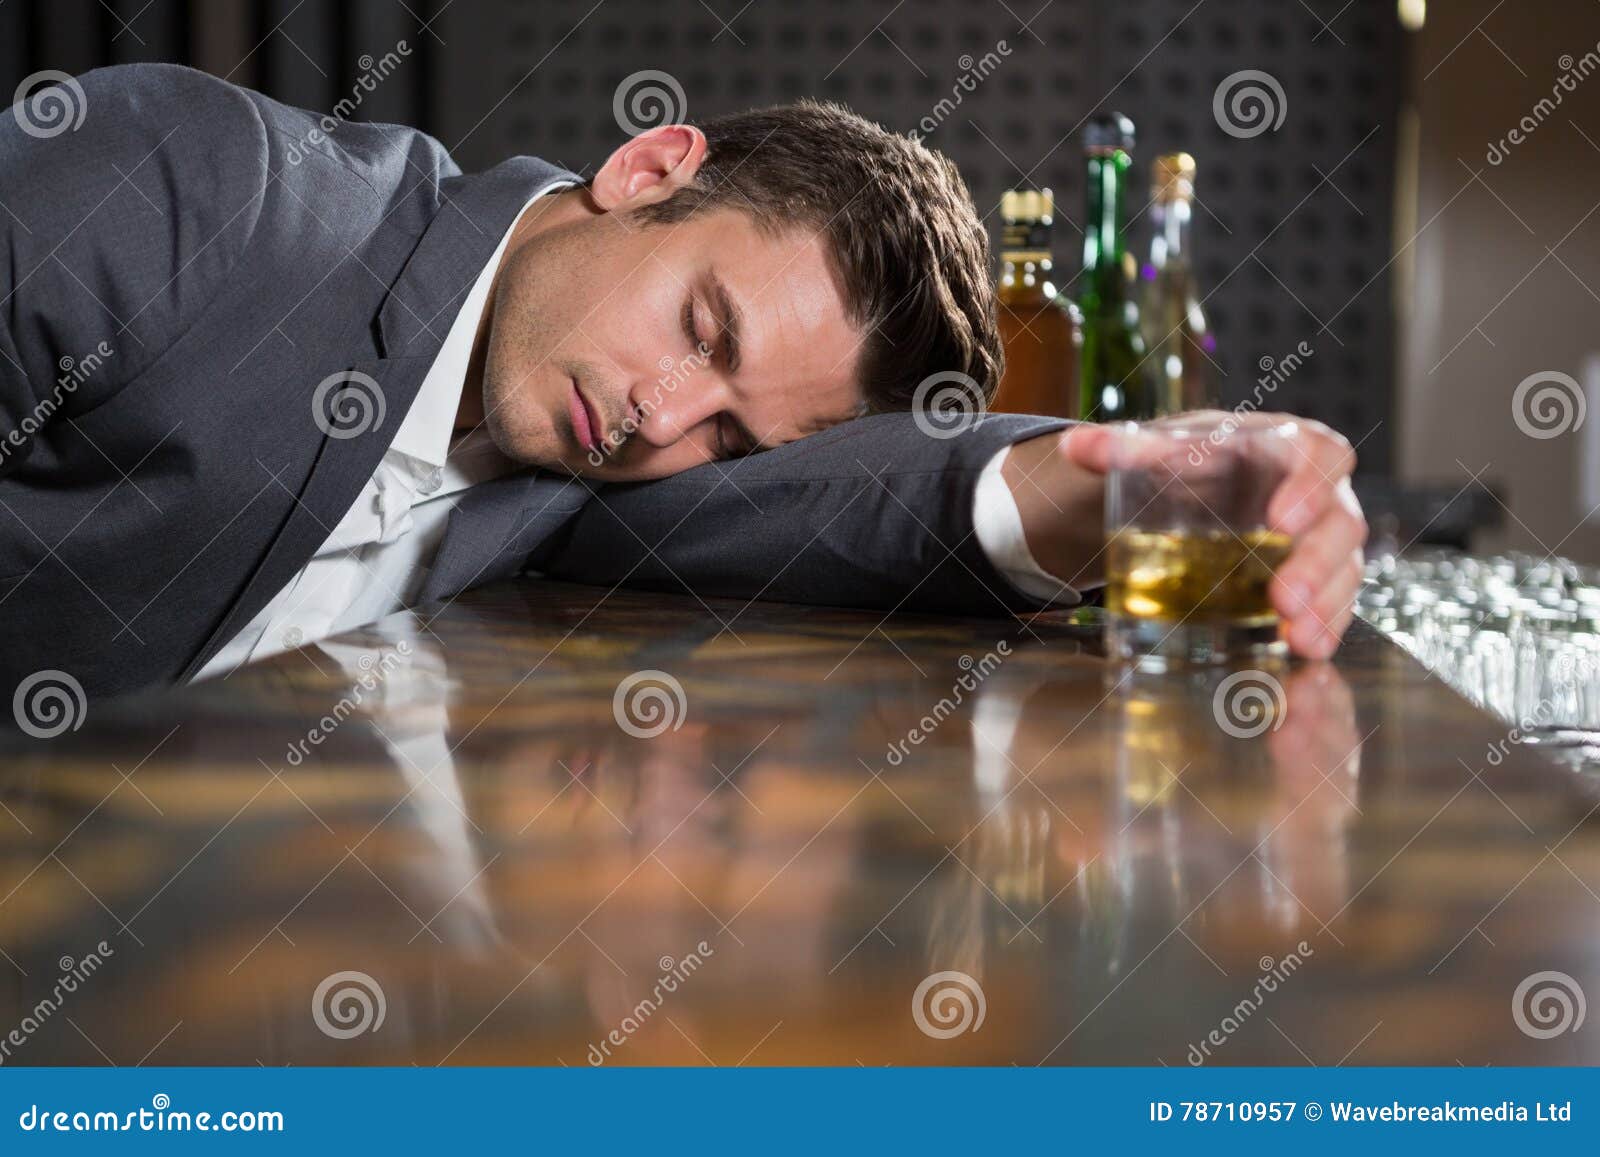 Drunk Man Lying on a Counter with Glass of Whisky Stock Image - Image ...